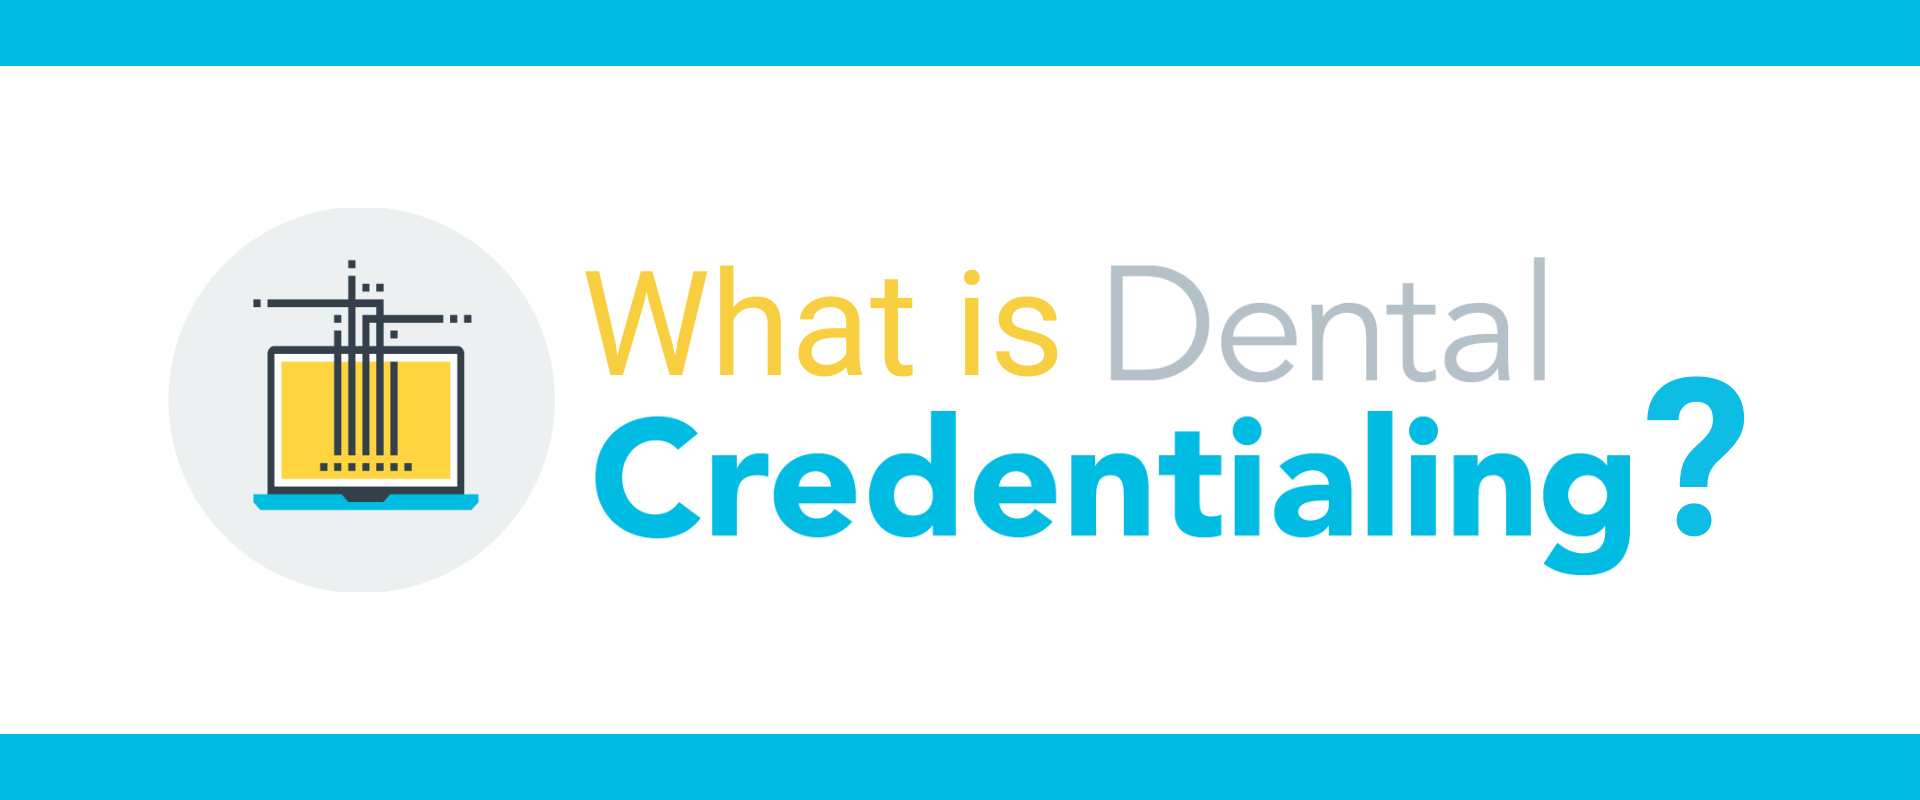 What is dental credentialing